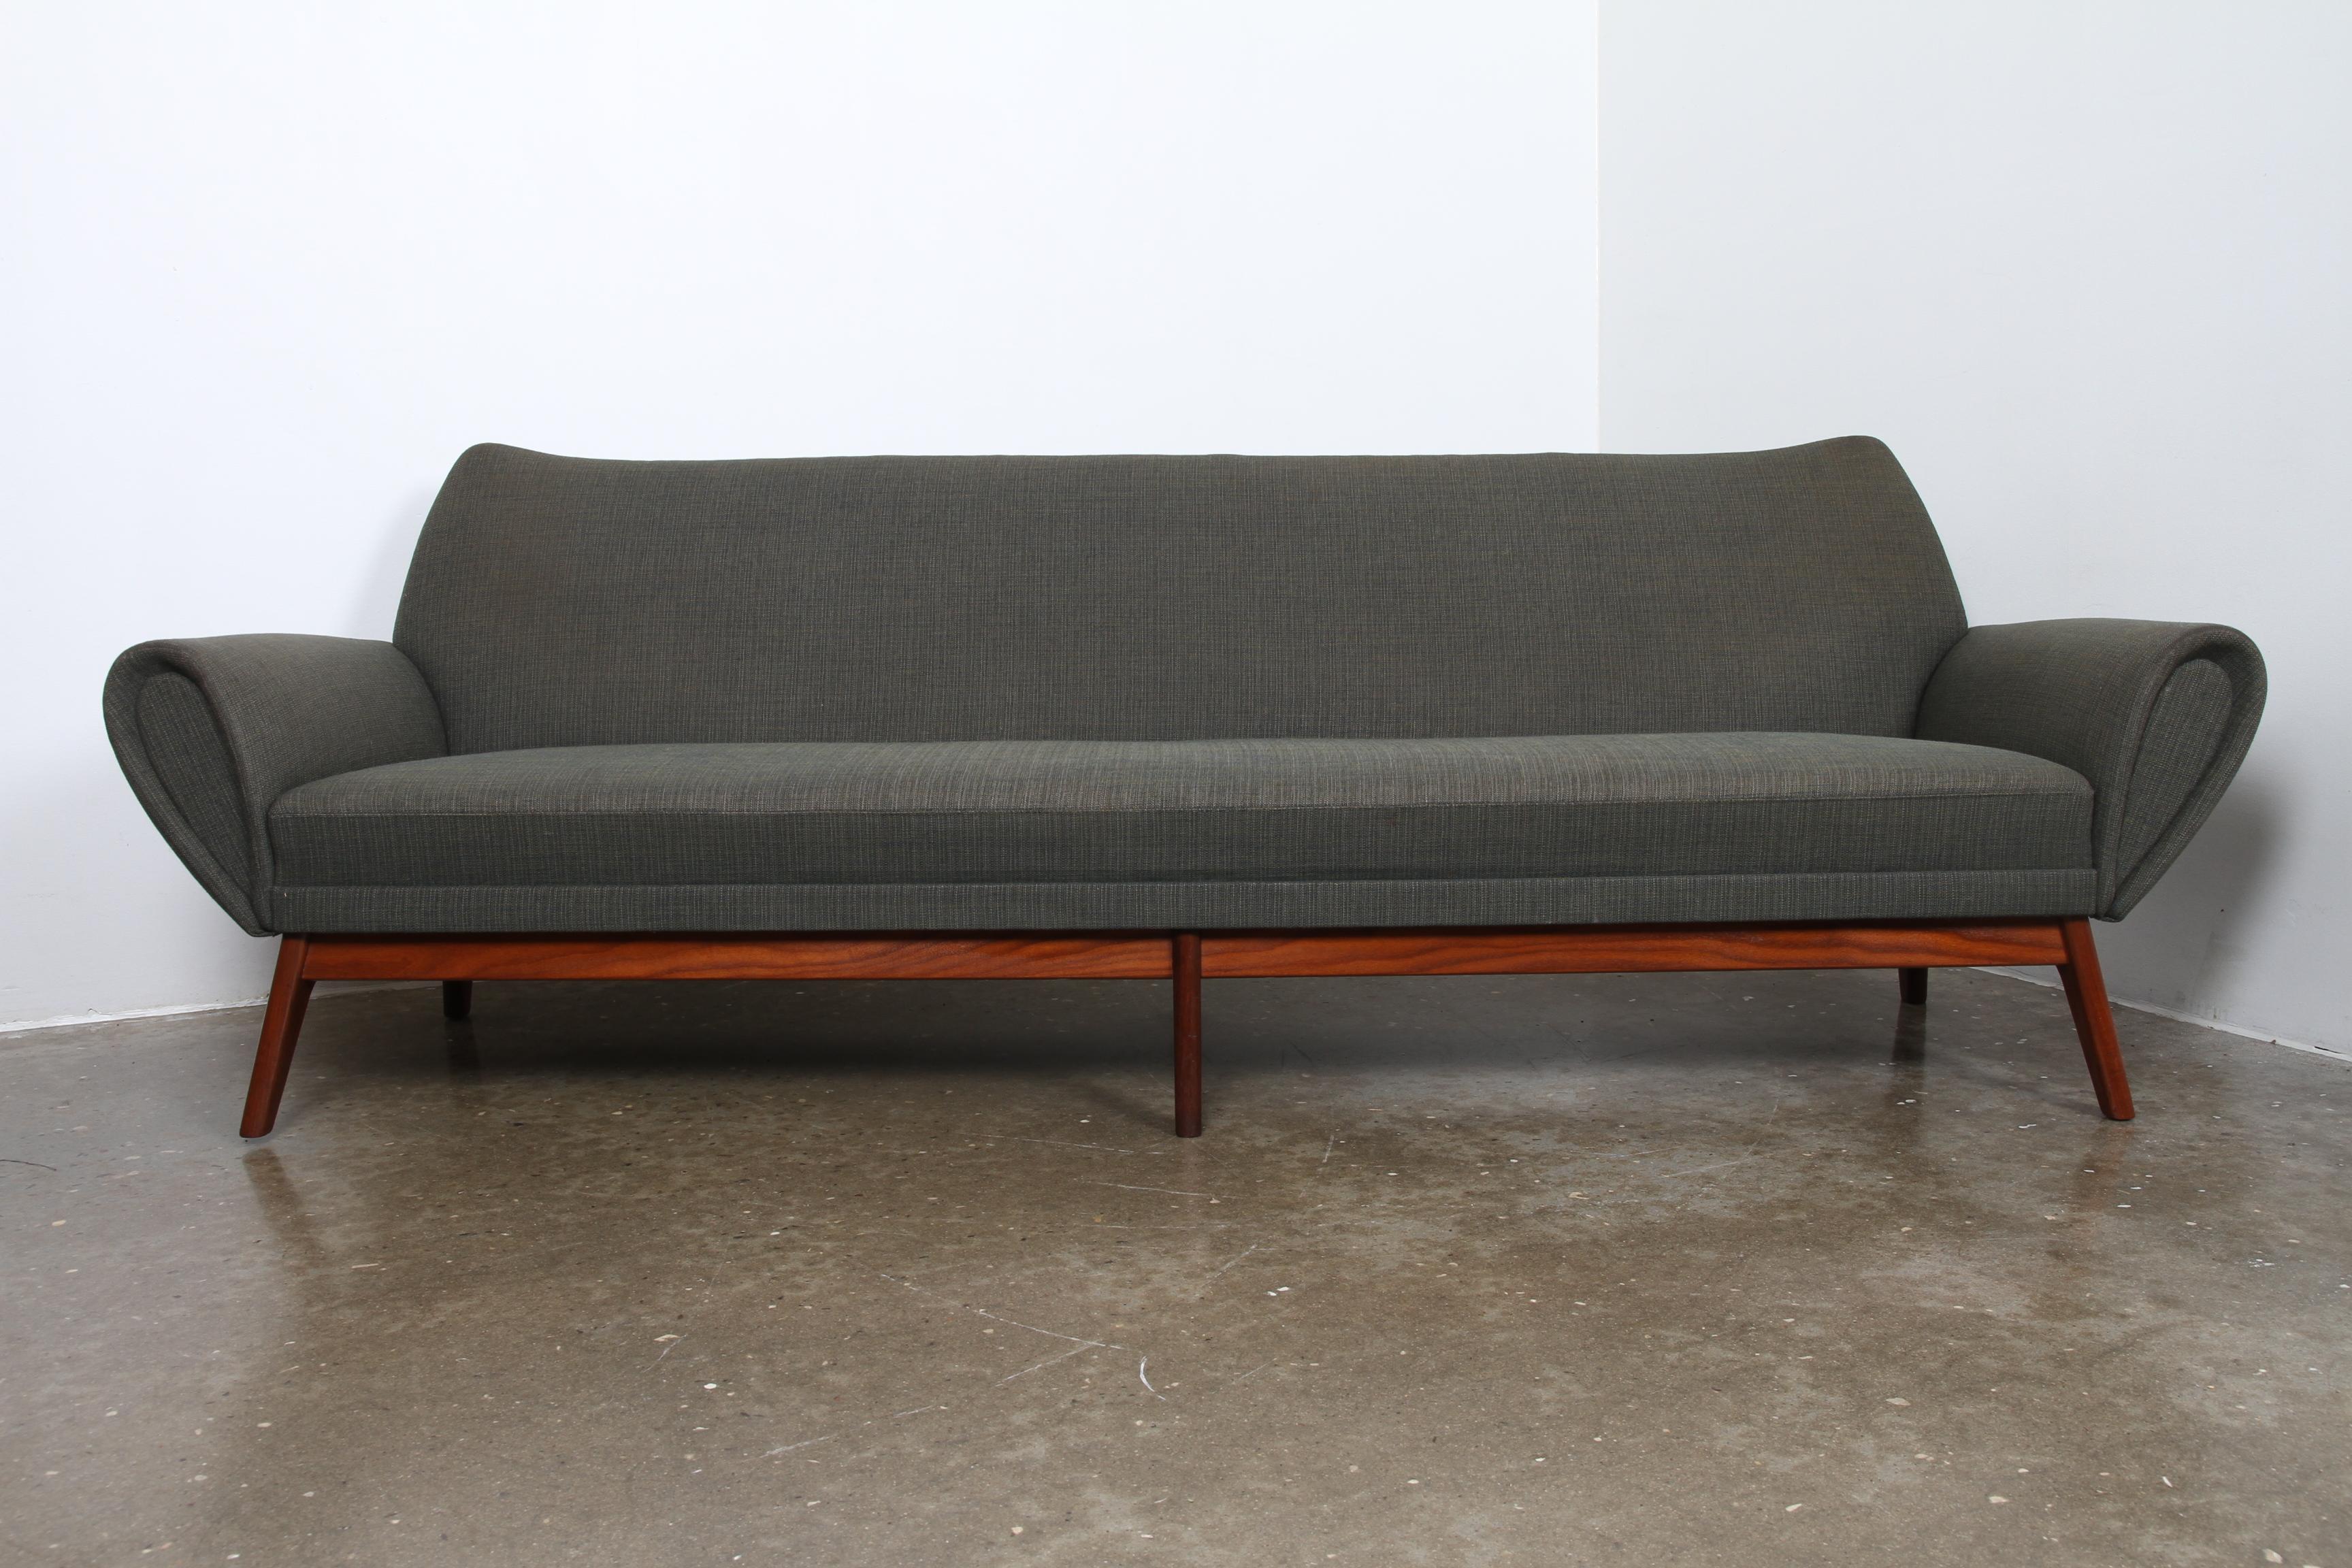 Probably the most beautiful couch ever made in Denmark. Immensely elegant vintage design. This a rare four-seater and it is the original green upholstery. Elegant curved armrests. Solid teak frame with six legs completes this rare work of art.